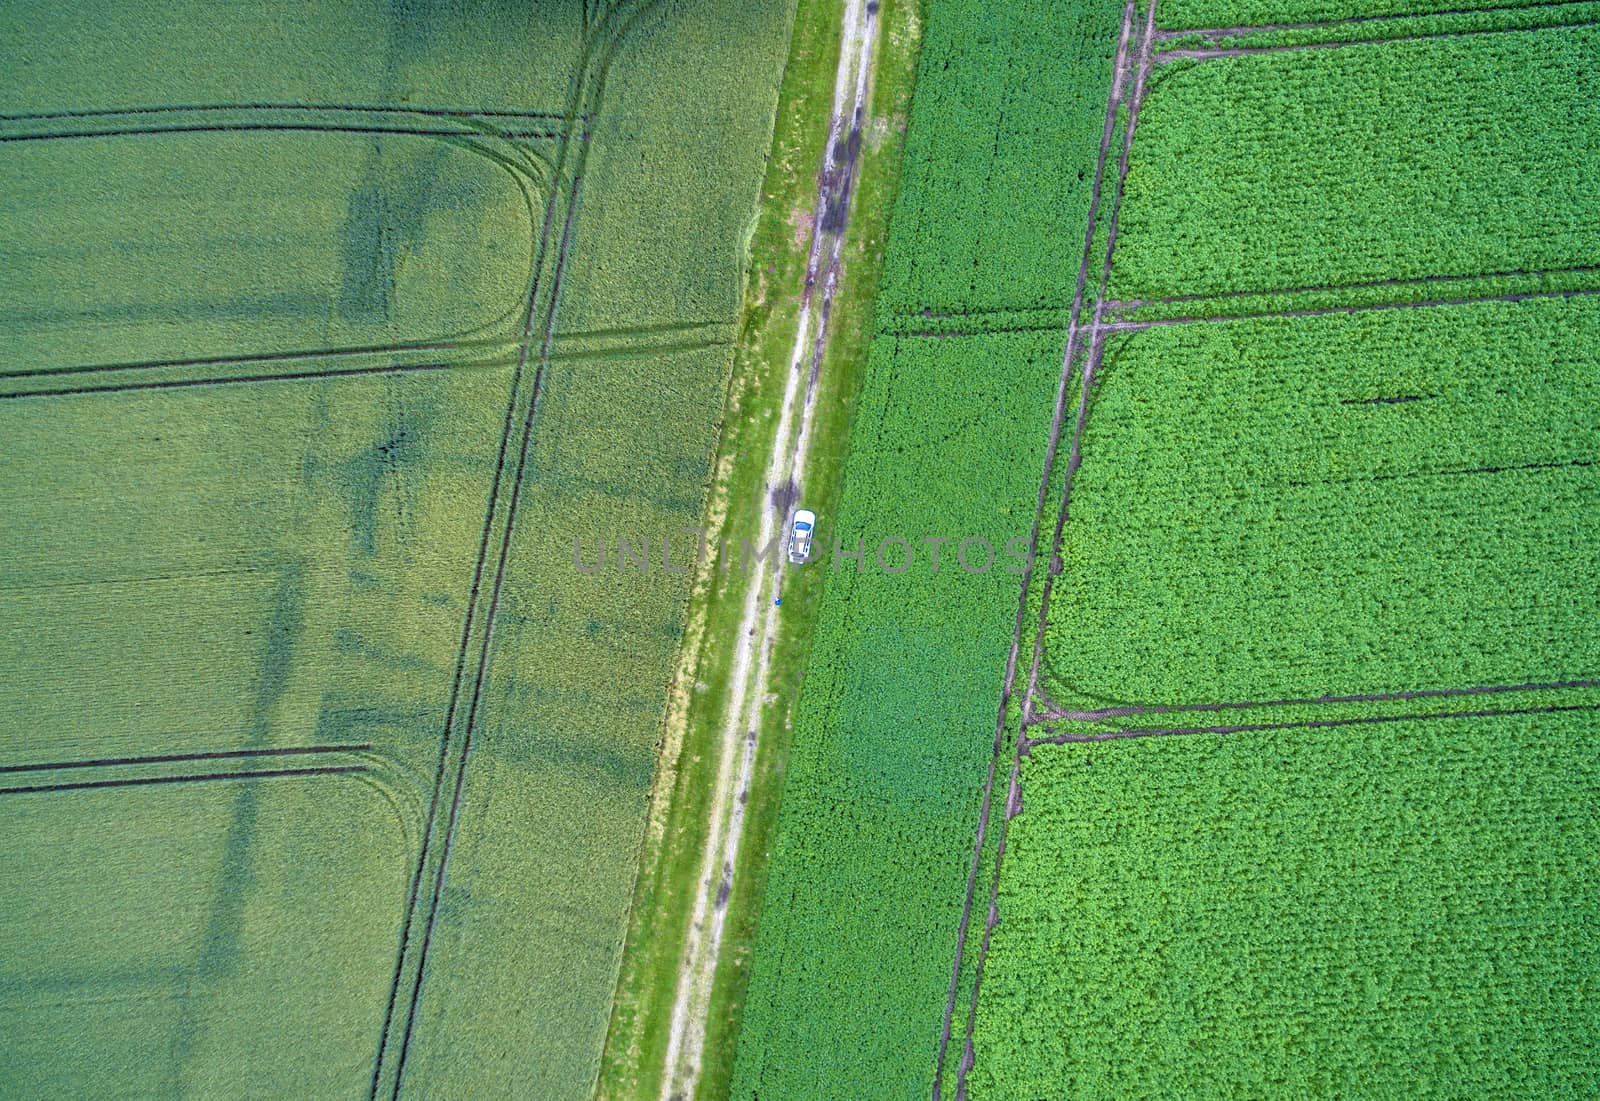 Aerial view of a path between two arable land with a car in the middle, taken at an abstract angle from a height of 100 metres by geogif